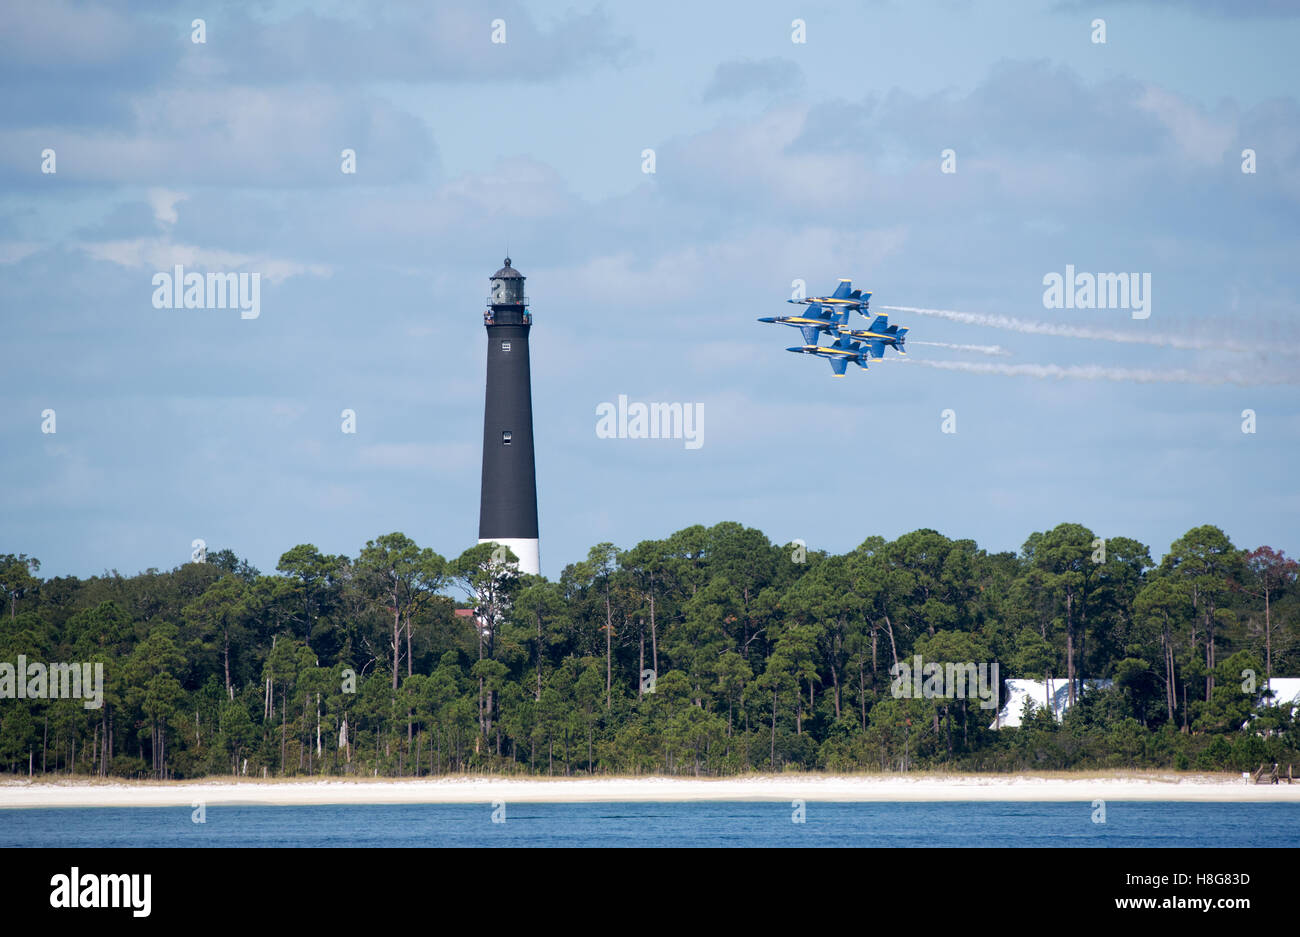 Pensacola Florida USA - Military jets flying in formation over Pensacola lighthouse and seen from Santa Rosa Island Stock Photo